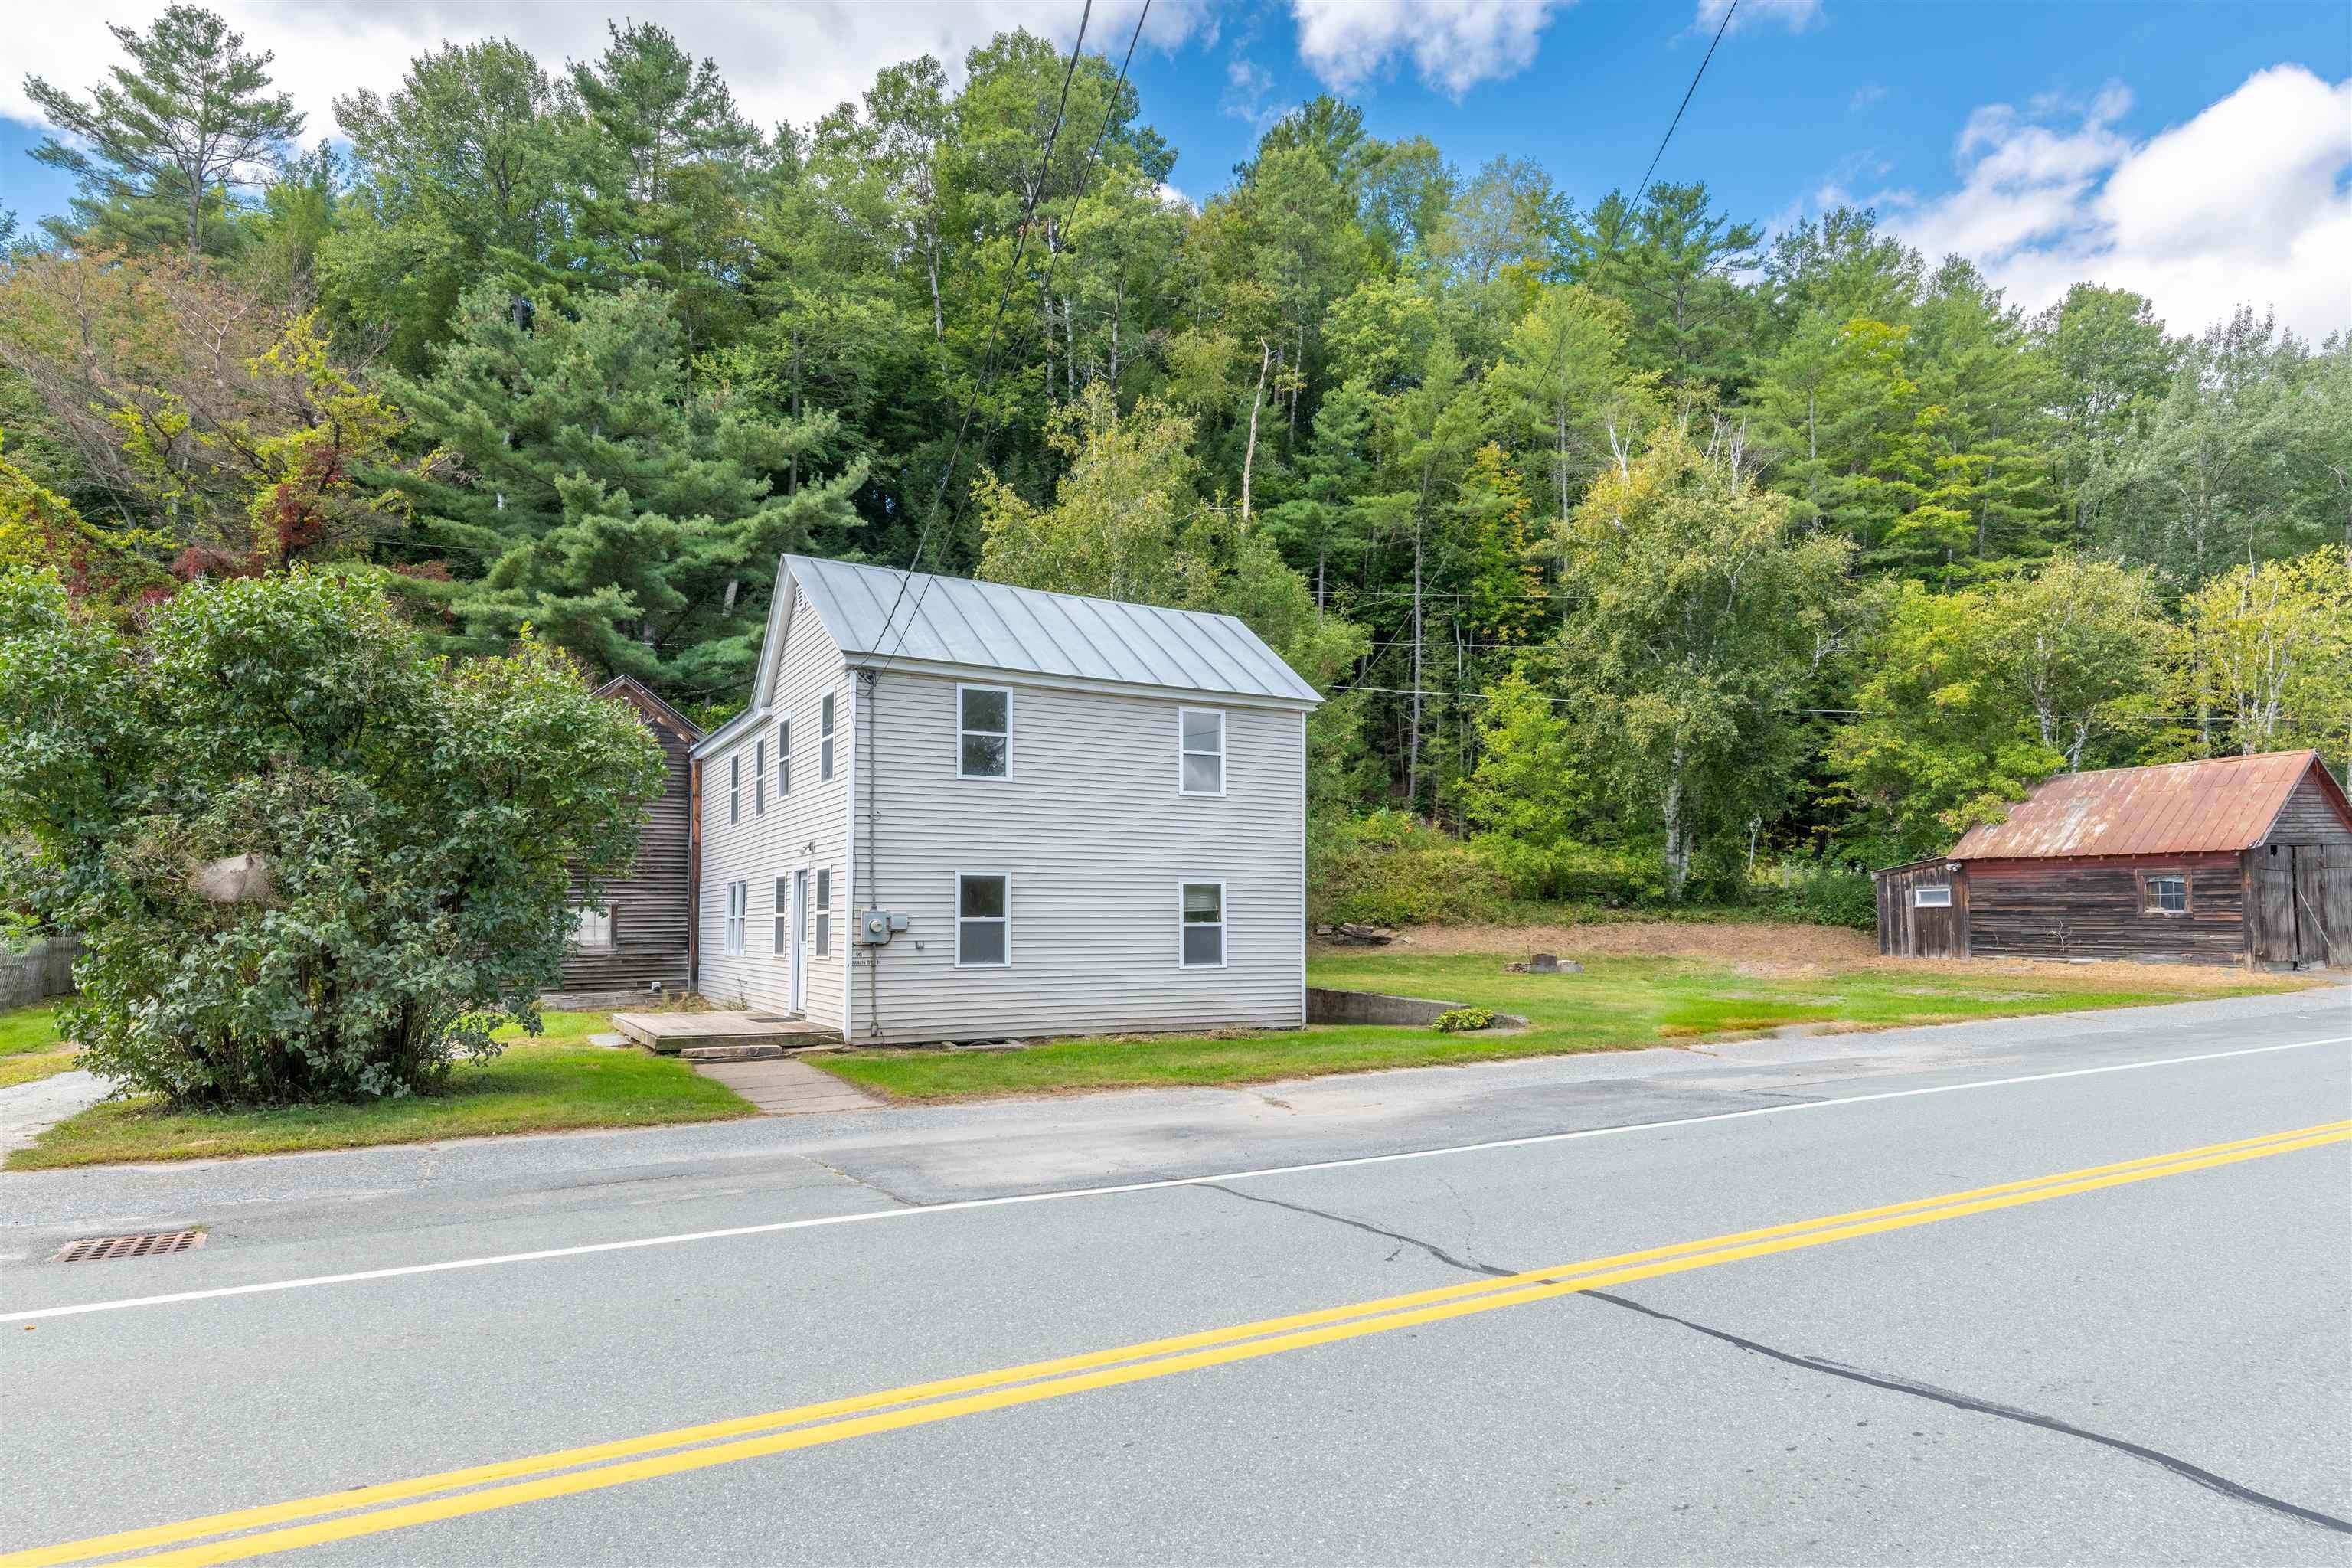 2. Single Family Homes for Sale at Newbury, VT 05081